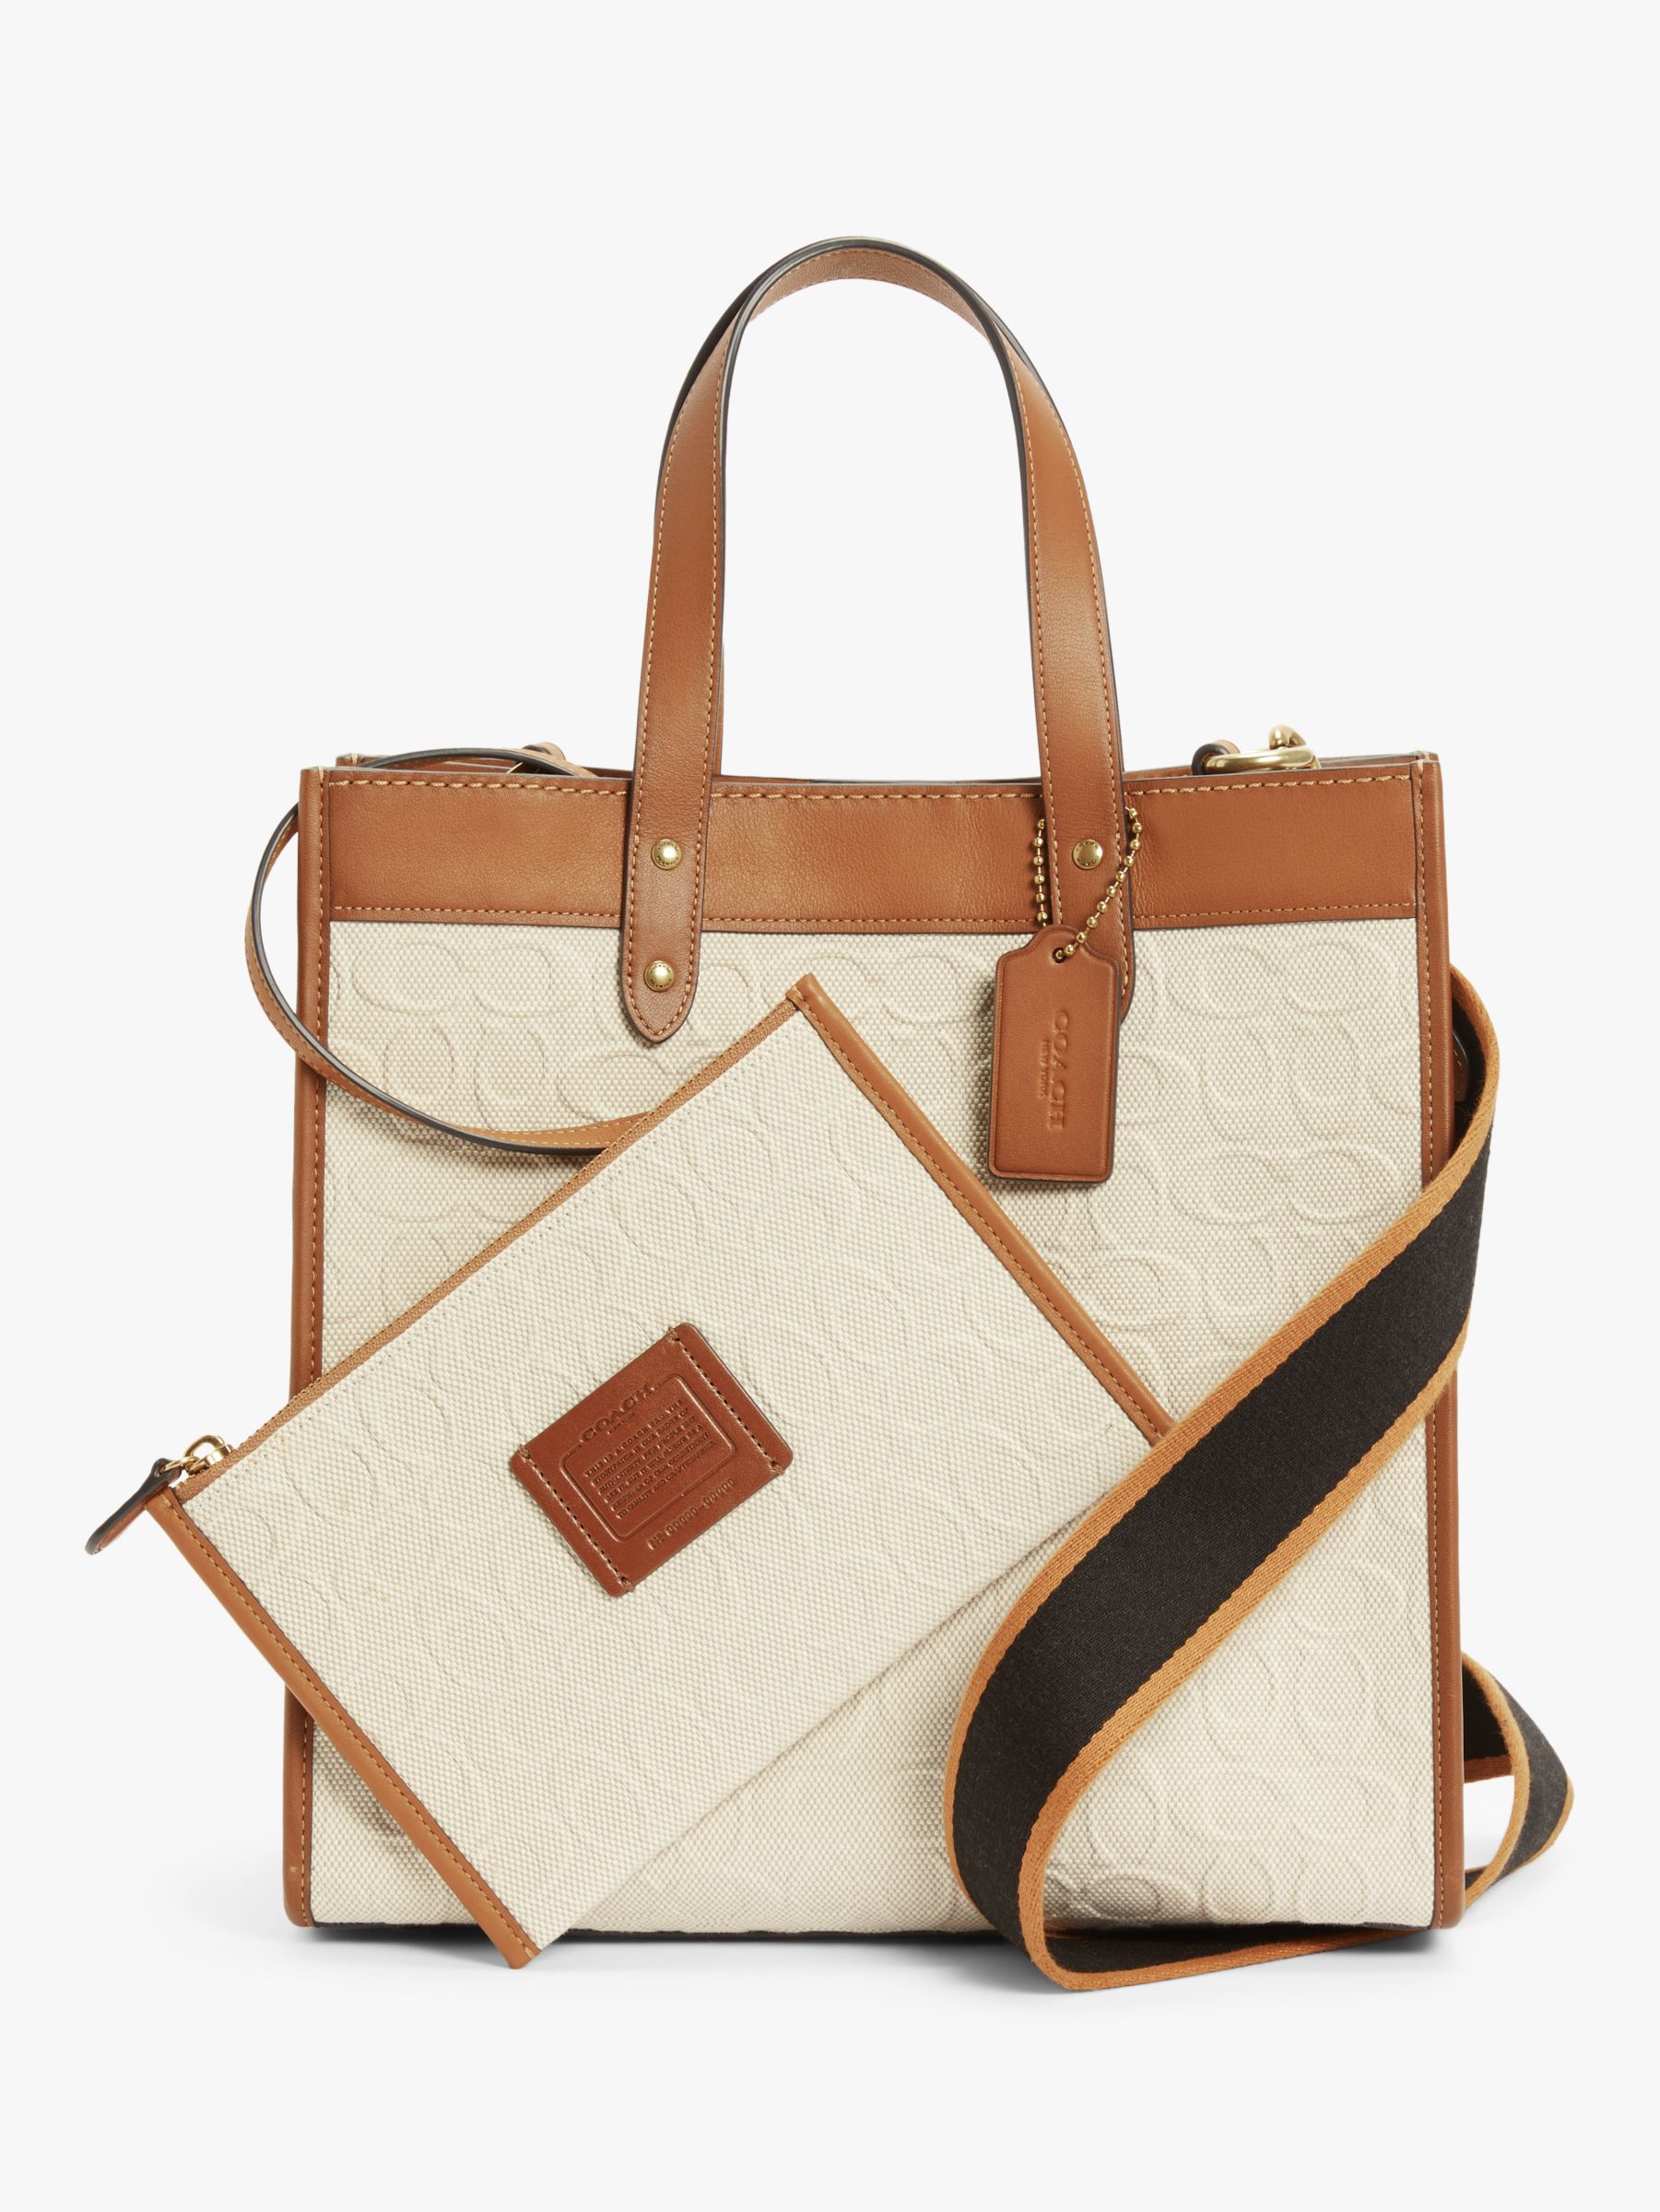 Coach Field Canvas Tote Bag, Saddle at John Lewis & Partners